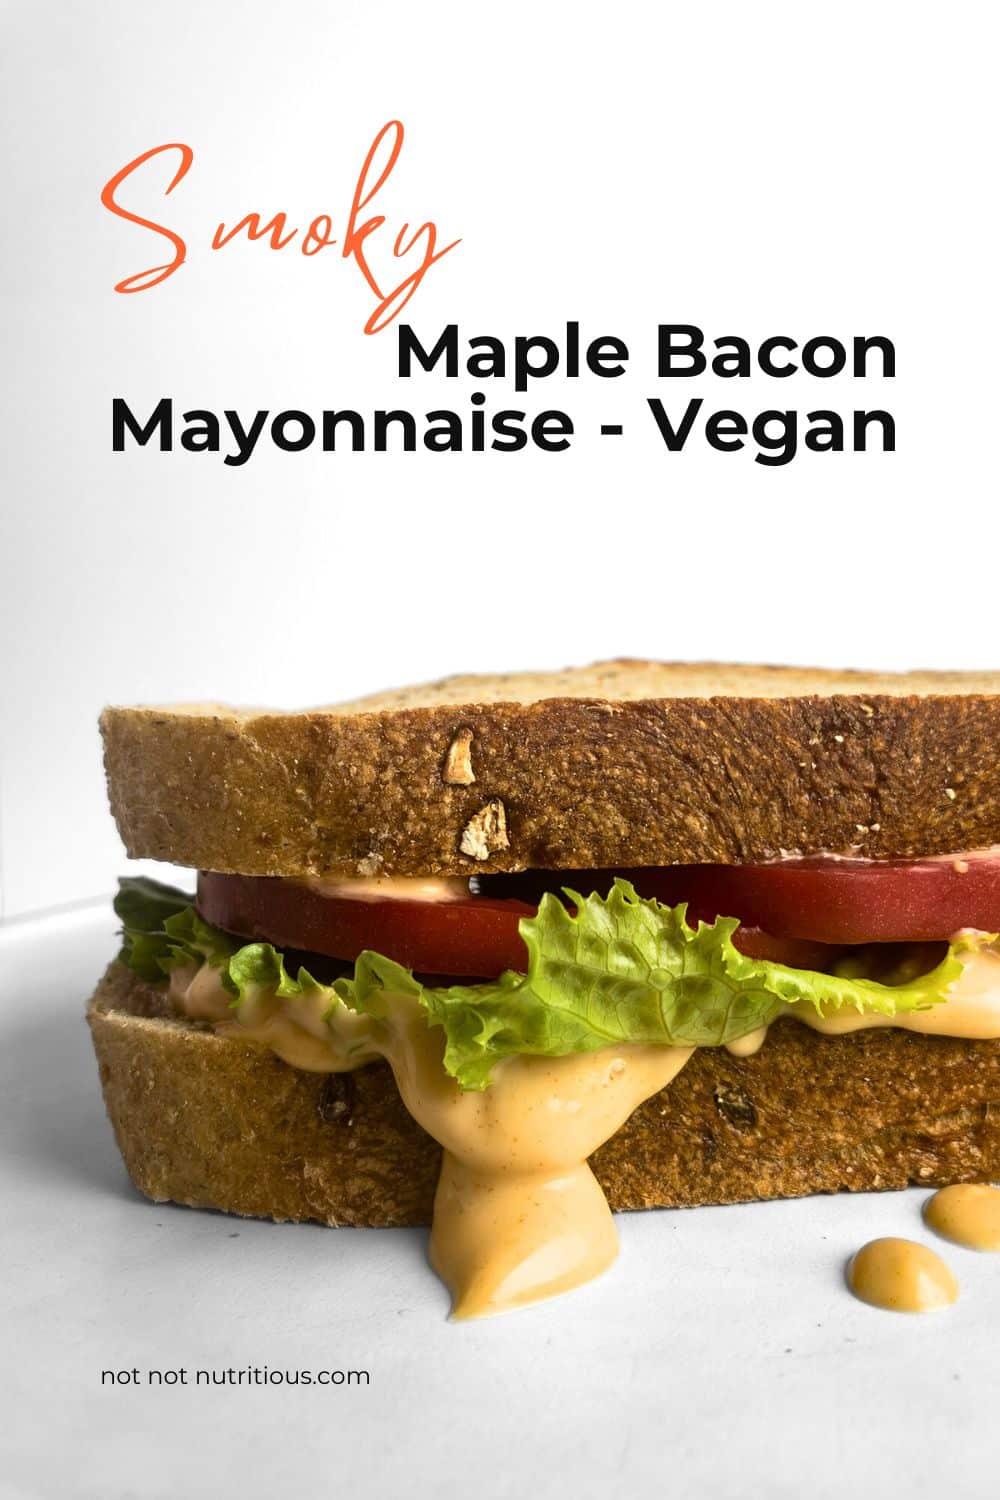 Serving suggestion for Smoky Maple Bacon Mayonnaise - a tomato, lettuce, and mayo sandwich.